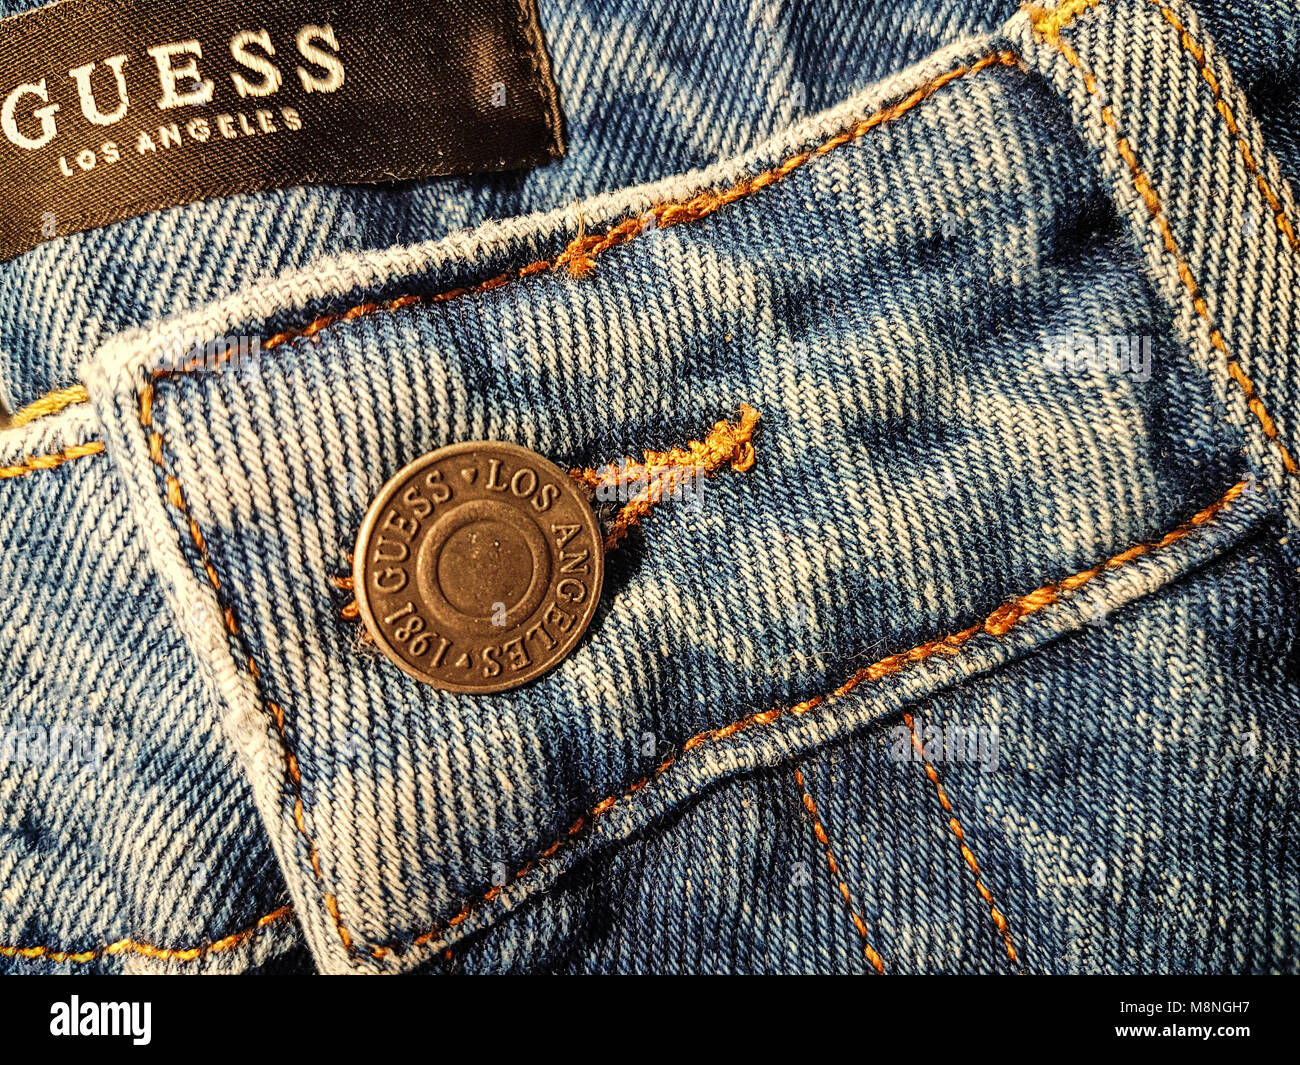 Krakow, Poland - February 21, 2018: Close-up of the Guess jeans button and front details.  Guess is a famous American clothing brand and retailer foun Stock Photo